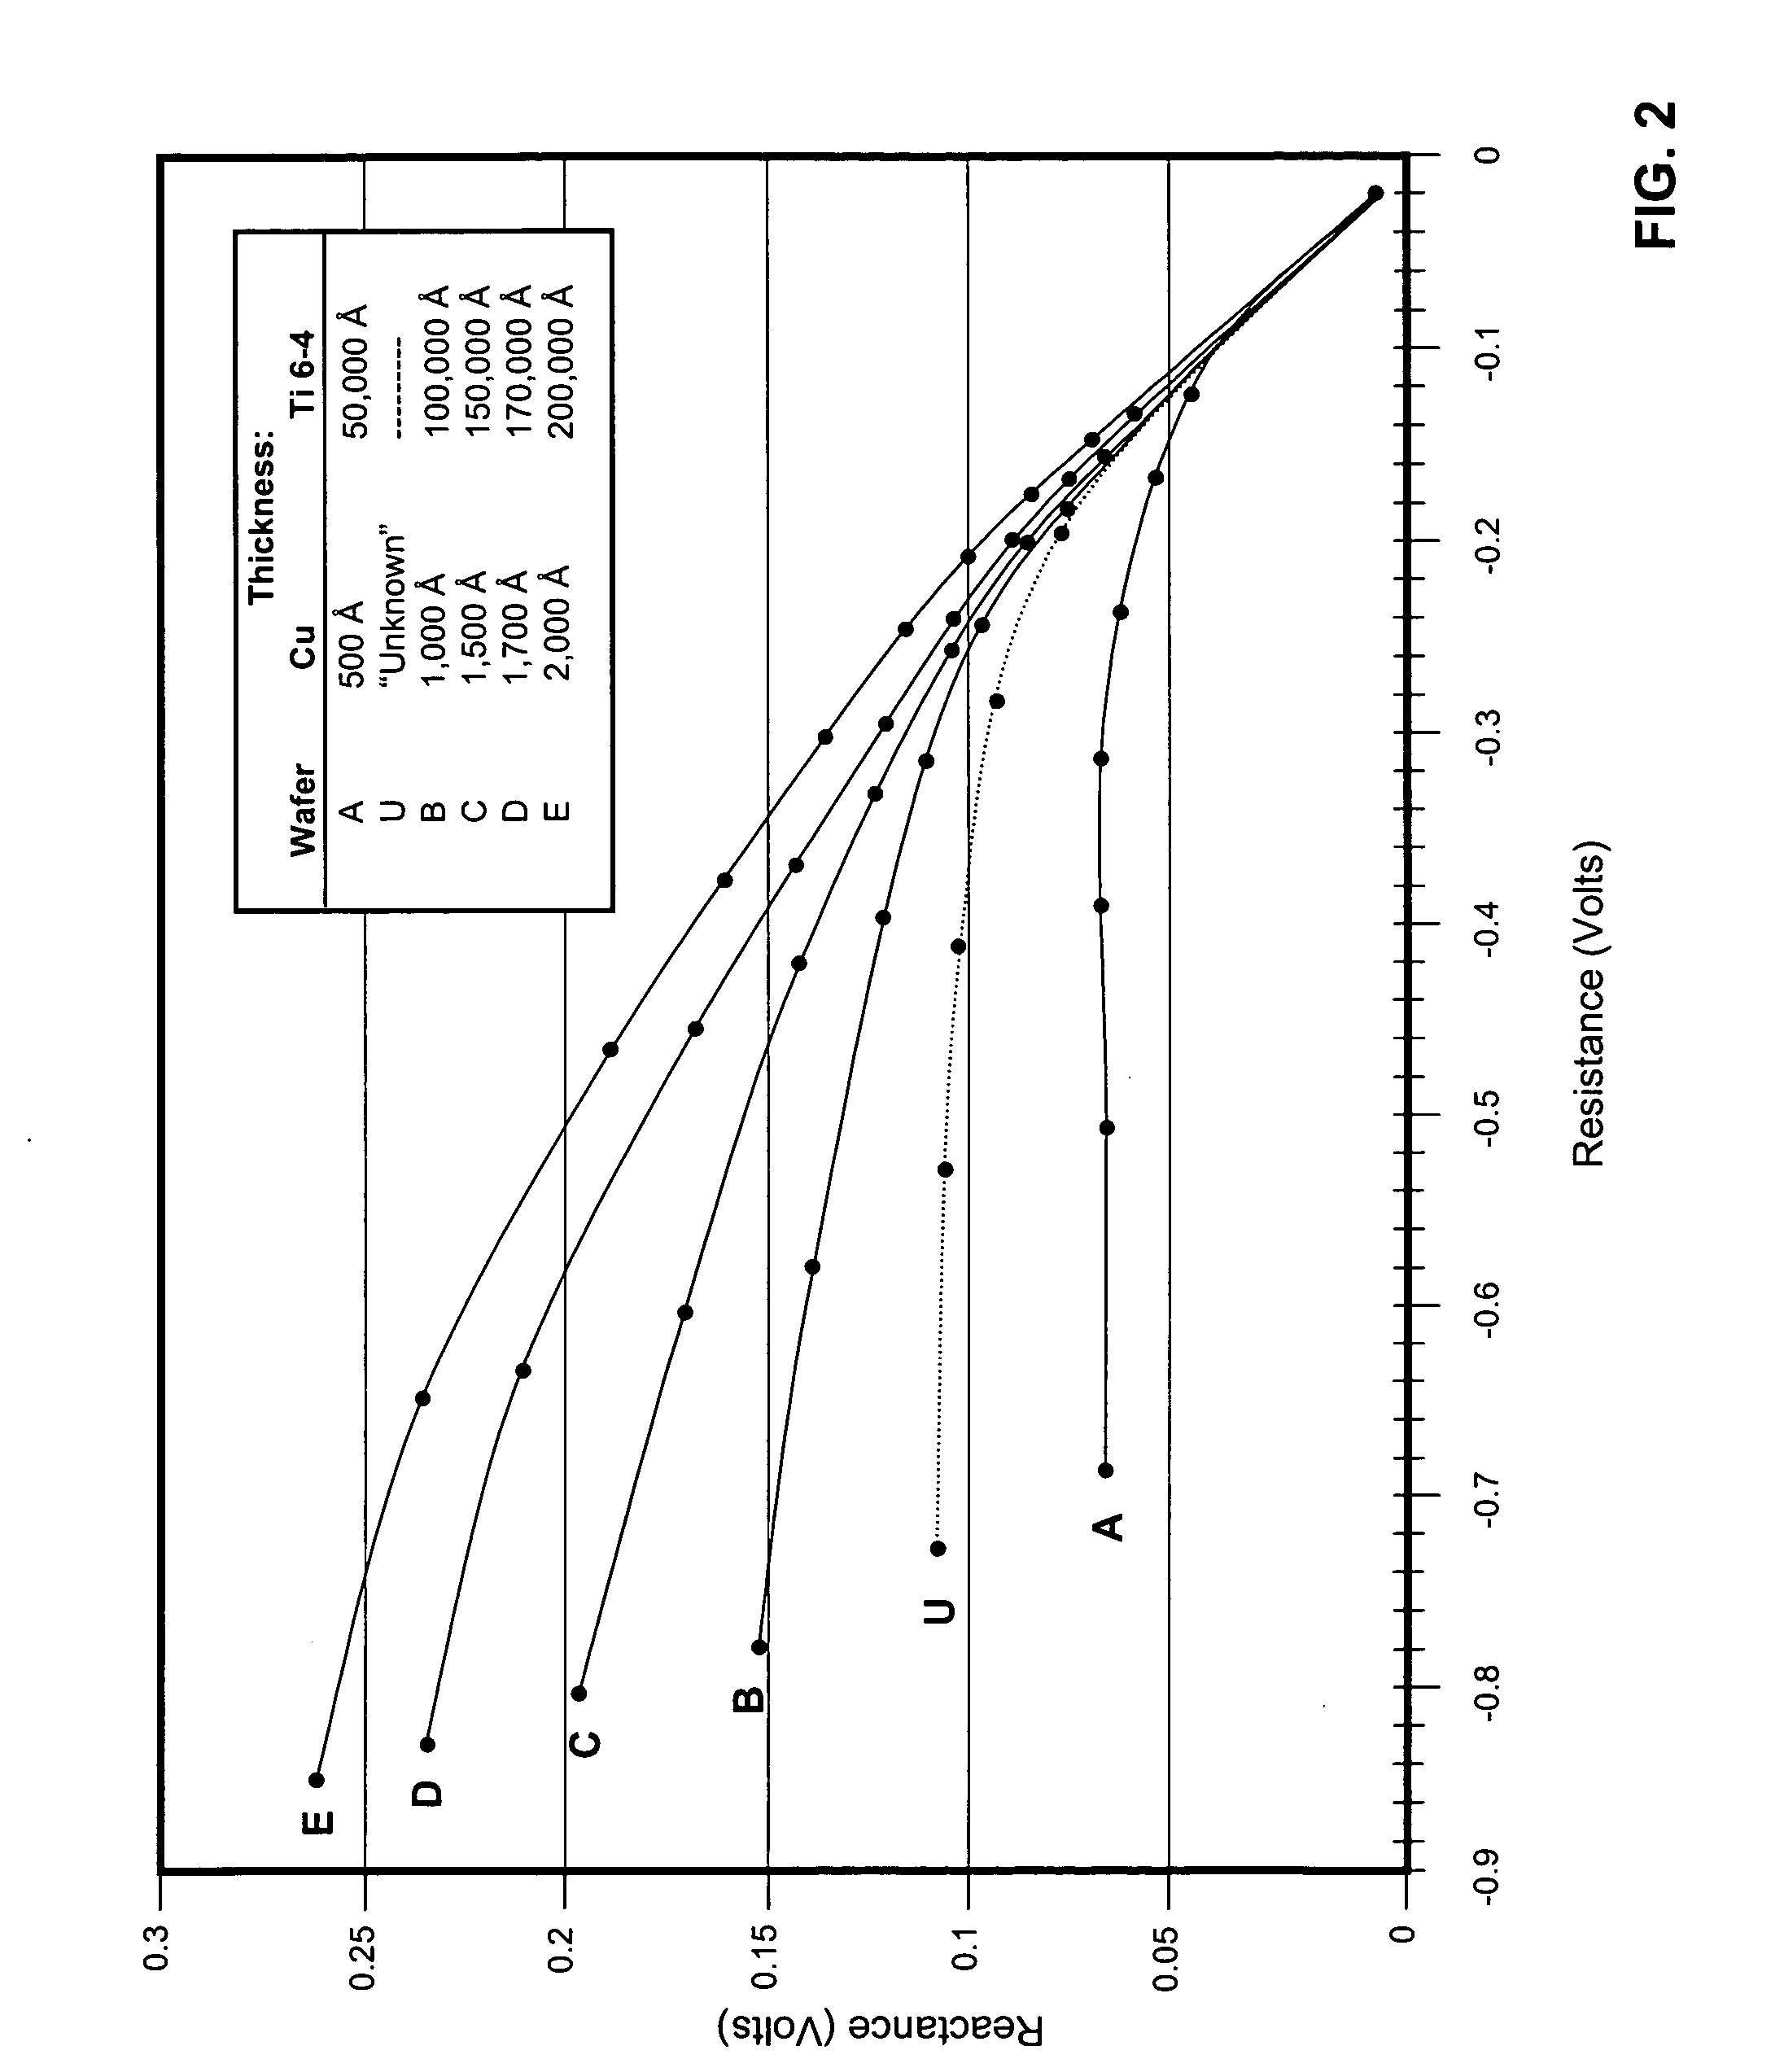 Thickness Estimation Using Conductively Related Calibration Samples